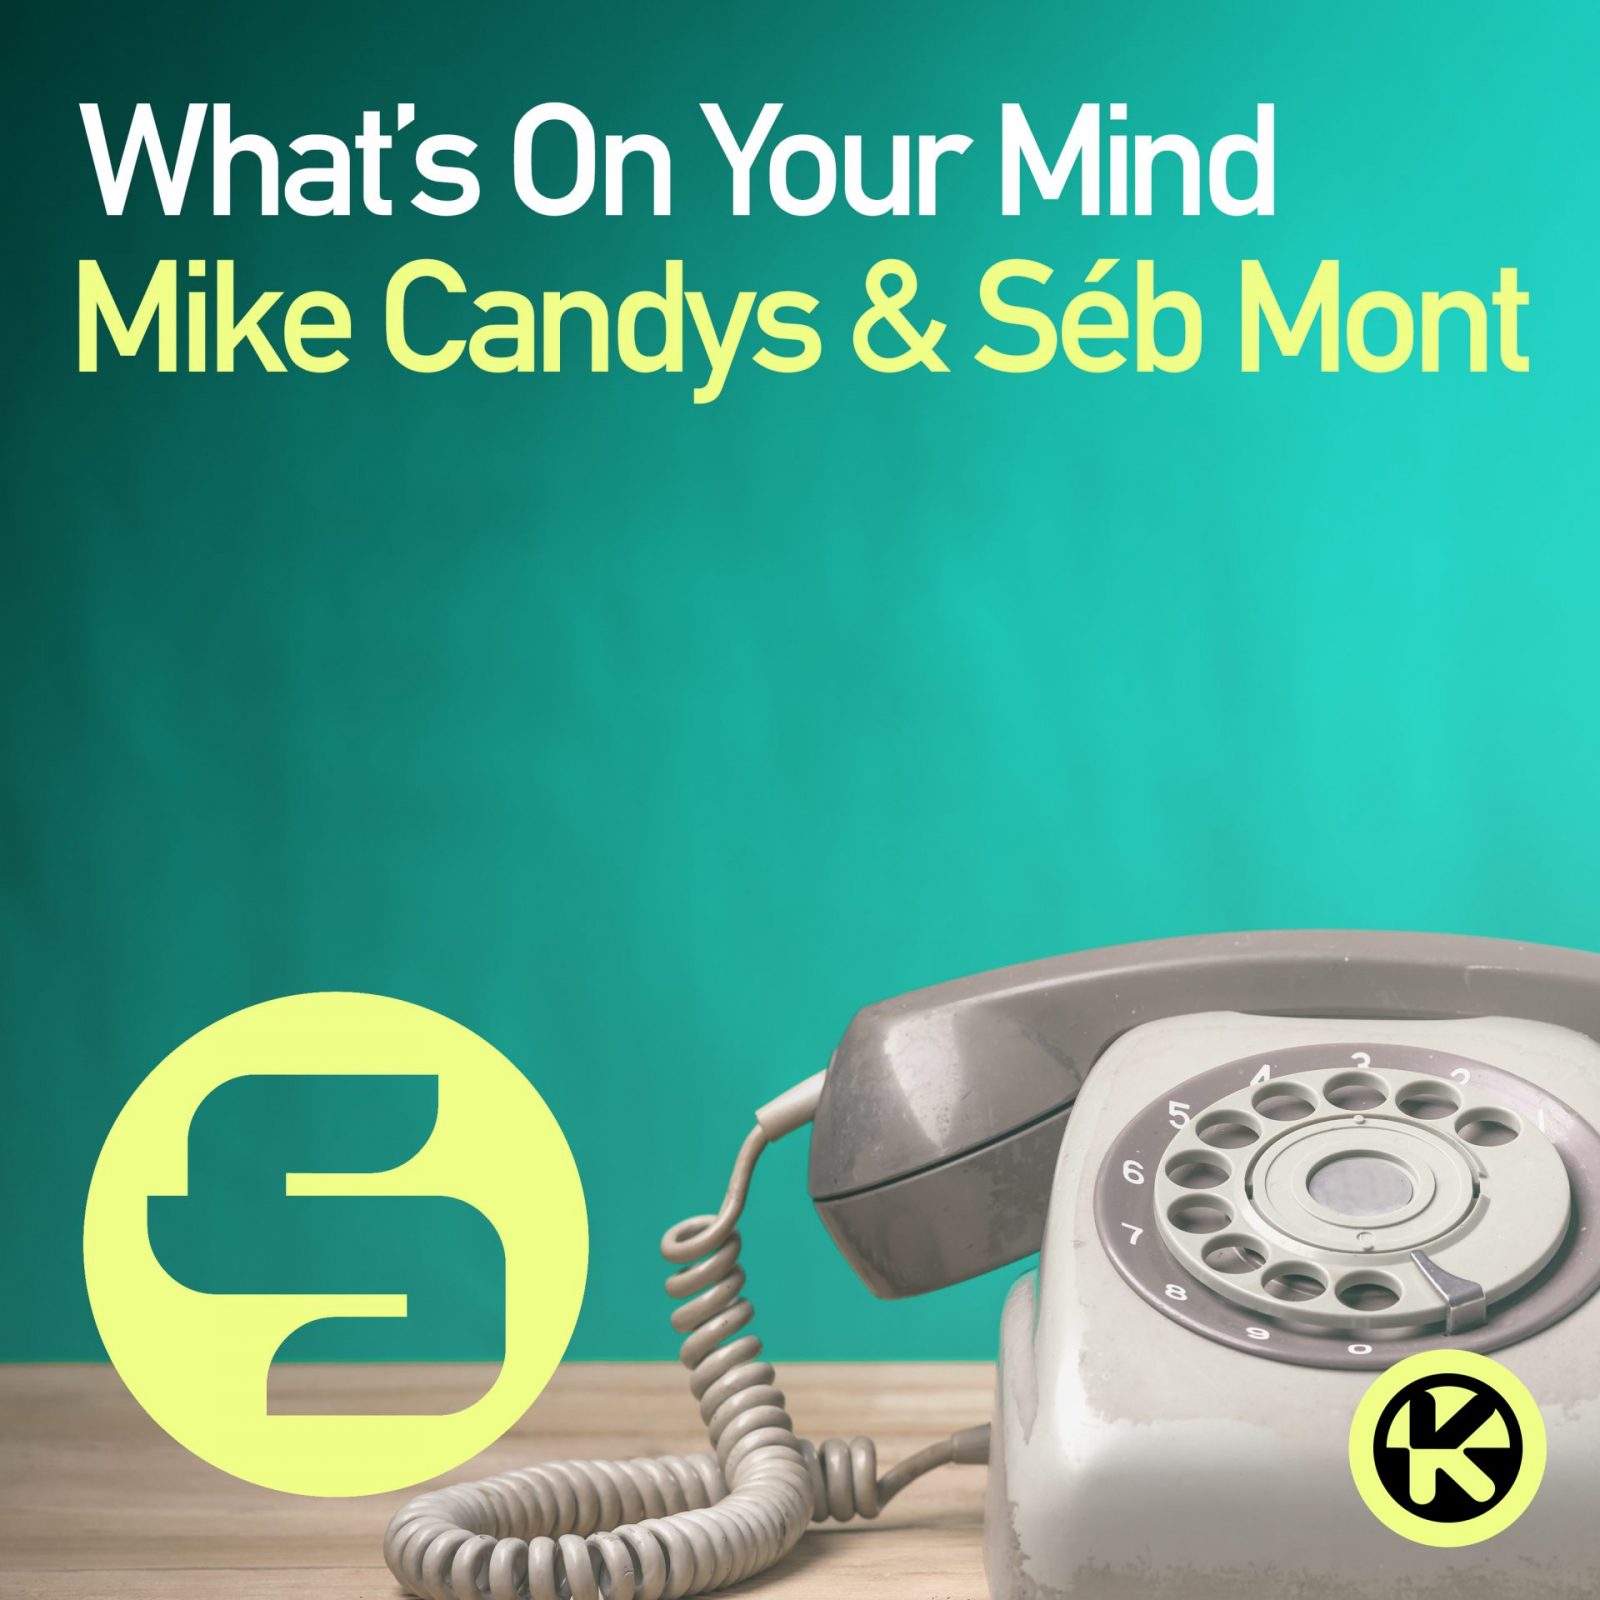 Mike Candys & Séb Mont "What's on Your Mind"